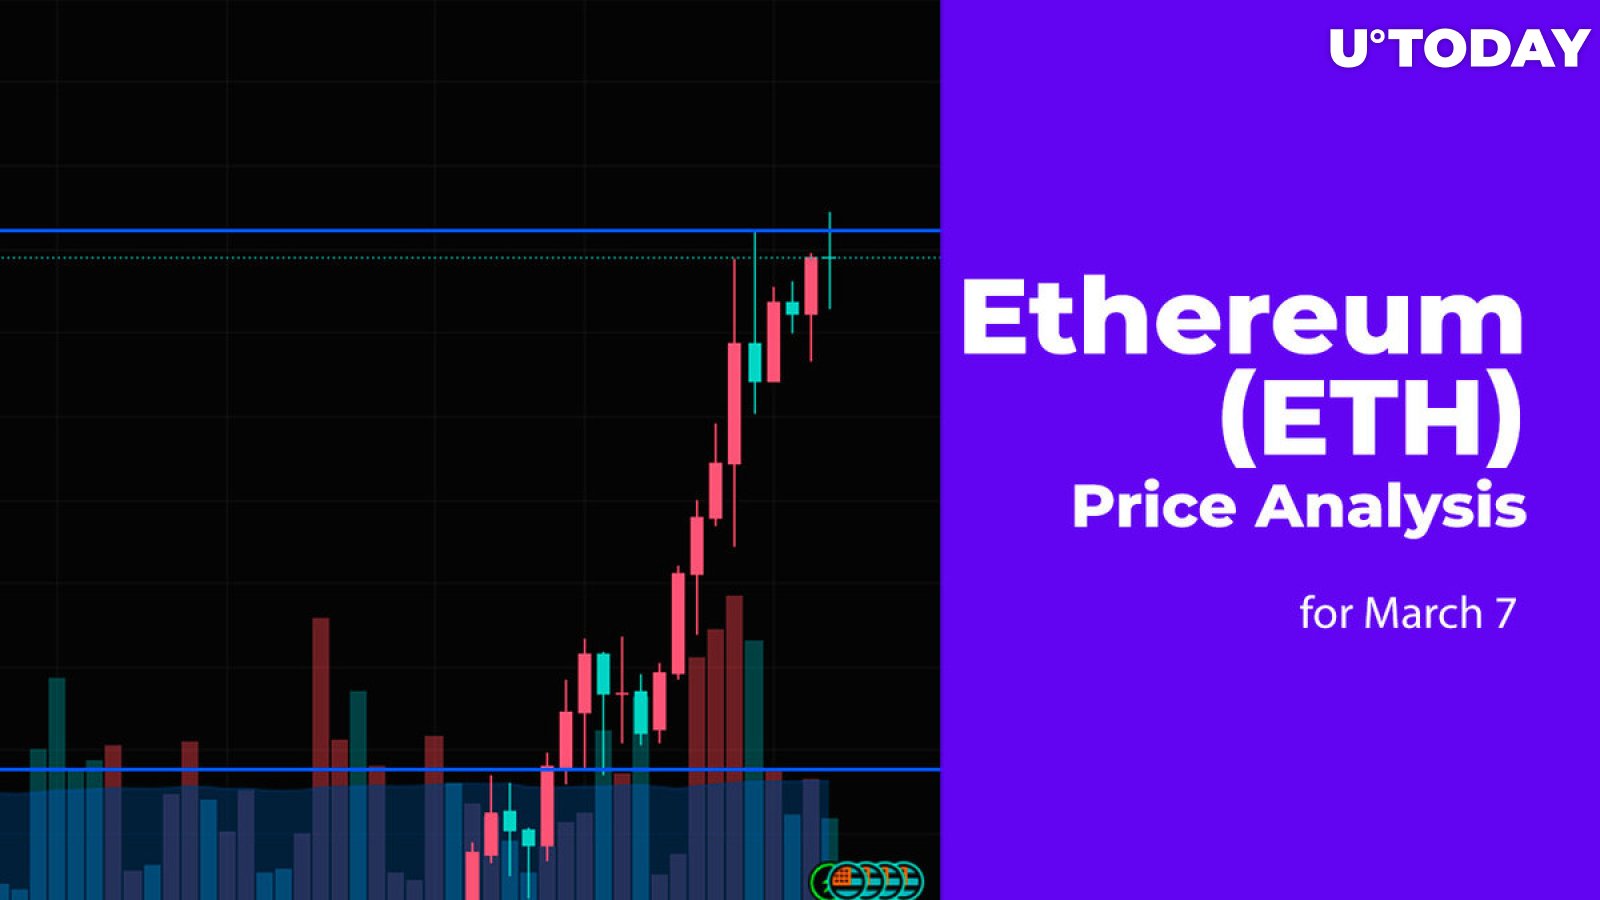 Ethereum (ETH) Price Prediction for March 7